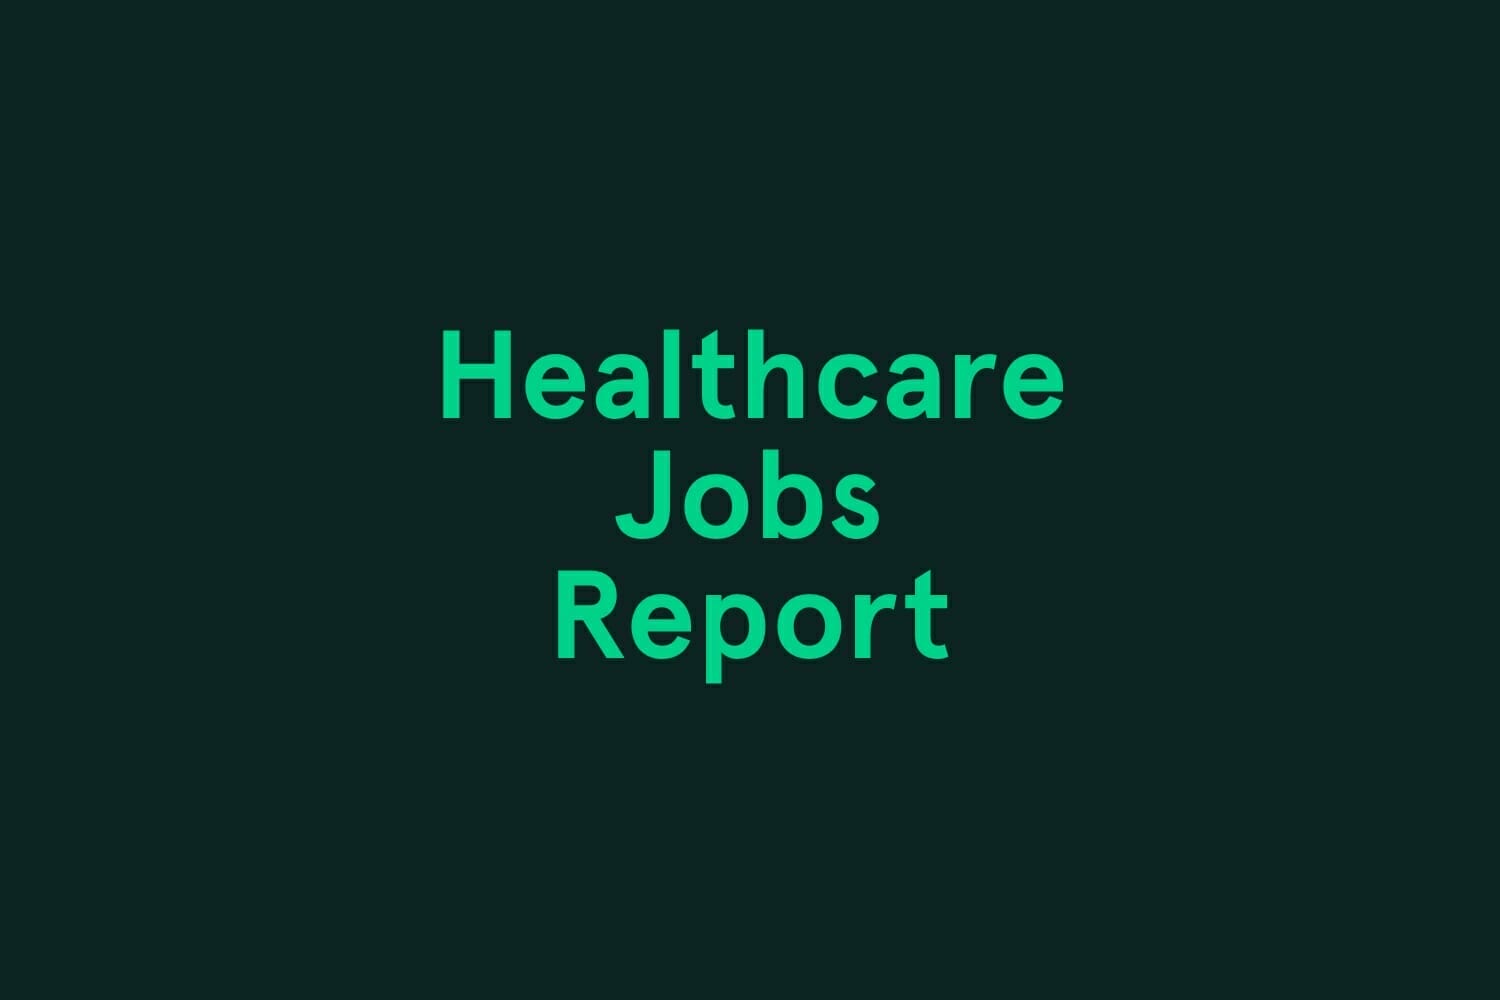 May Healthcare Jobs Report Infographic